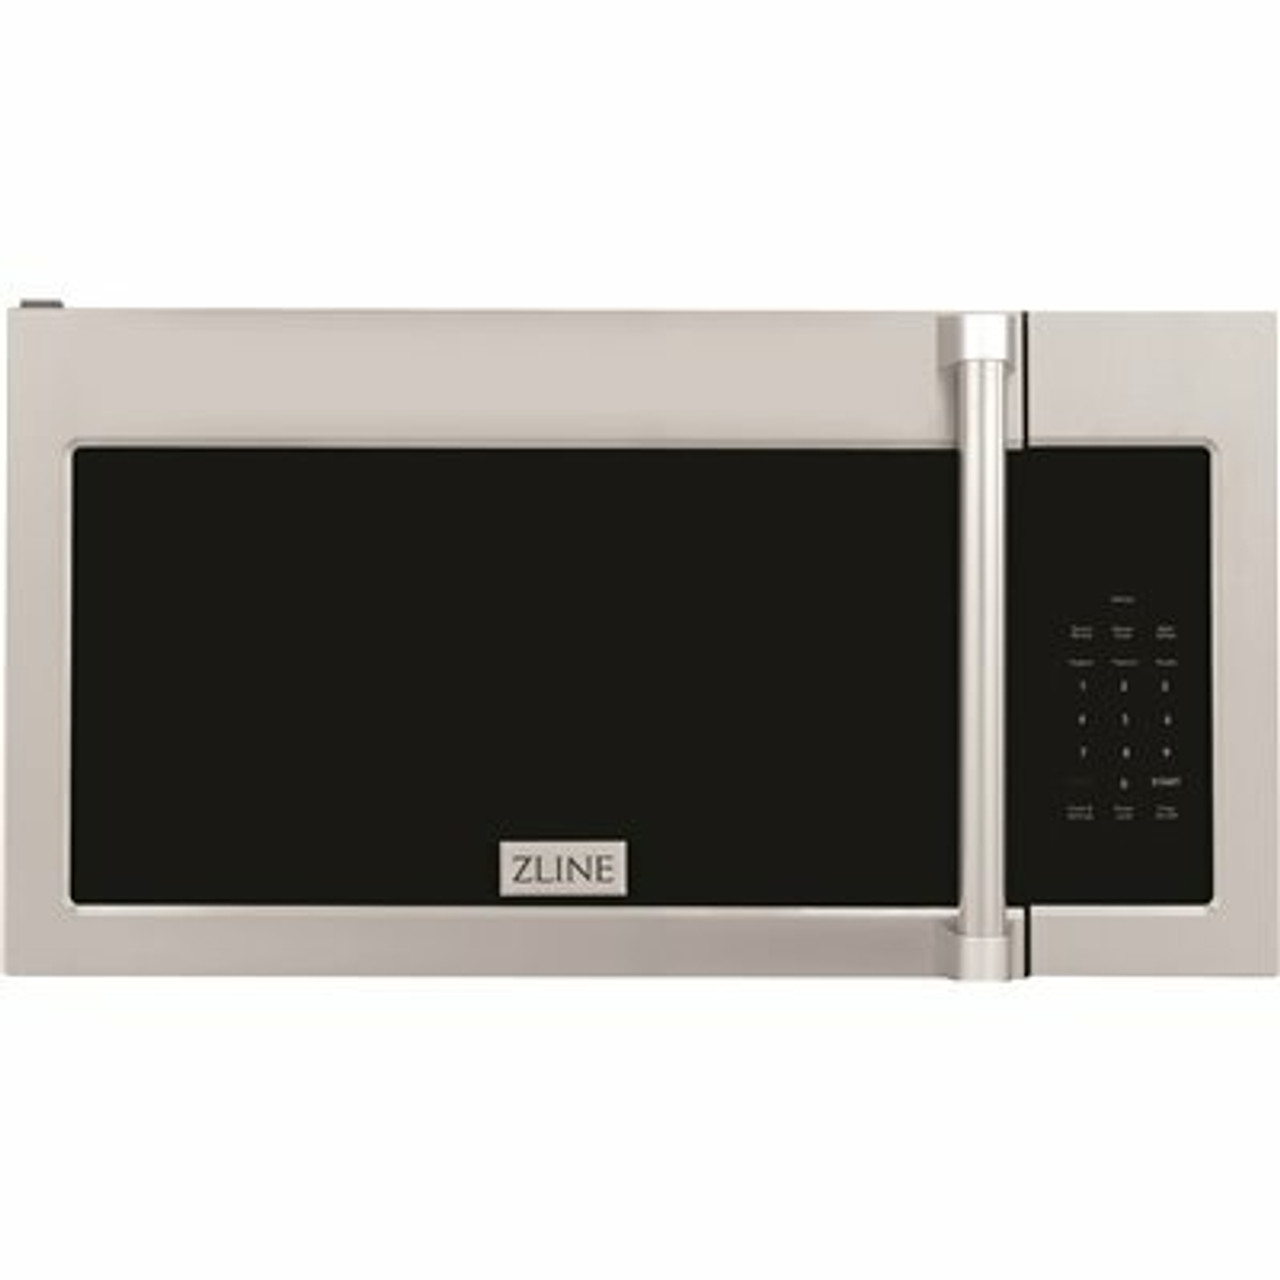 1.5 Cu. Ft. Over The Range Convection Microwave Oven In Stainless Steel With Traditional Handle With Sensor Cooking